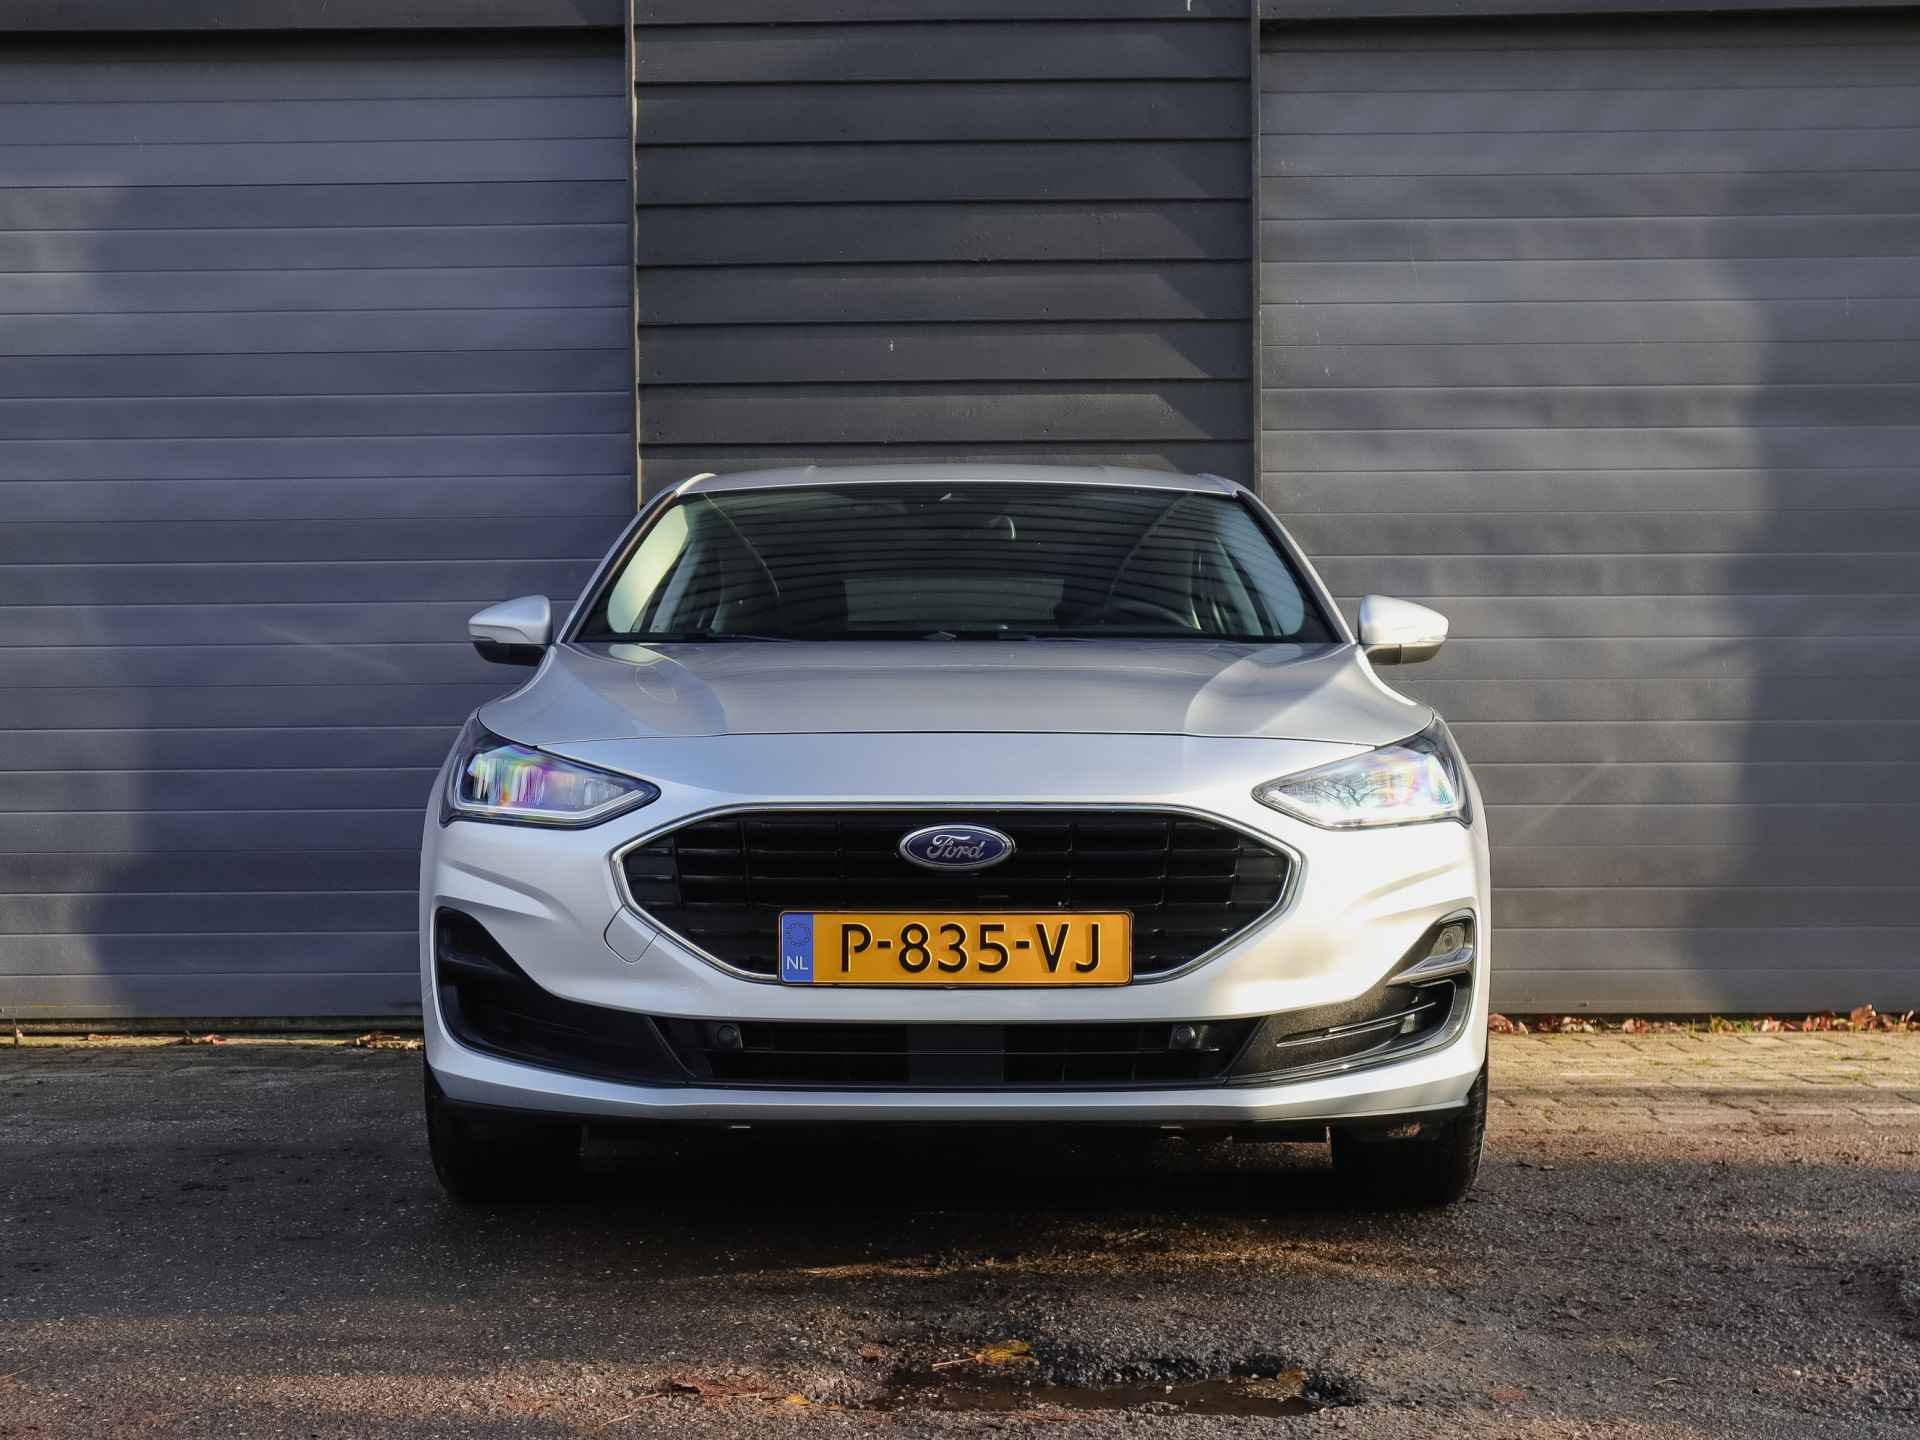 Ford Focus 1.0i Hybrid Connected, (149PK) 1e-Eig, Ford-Dealer-Onderh, 12-Mnd-BOVAG, NL-Auto, Navigatie/Apple-Carplay/Android-Auto, Parkeersensoren-V+A, Cruise-Control, Airco, DAB, Lane-Assist, Privacy-Glas, Sportstoelen, Led-Koplampen, Adaptieve-Cruise-Control - 14/55